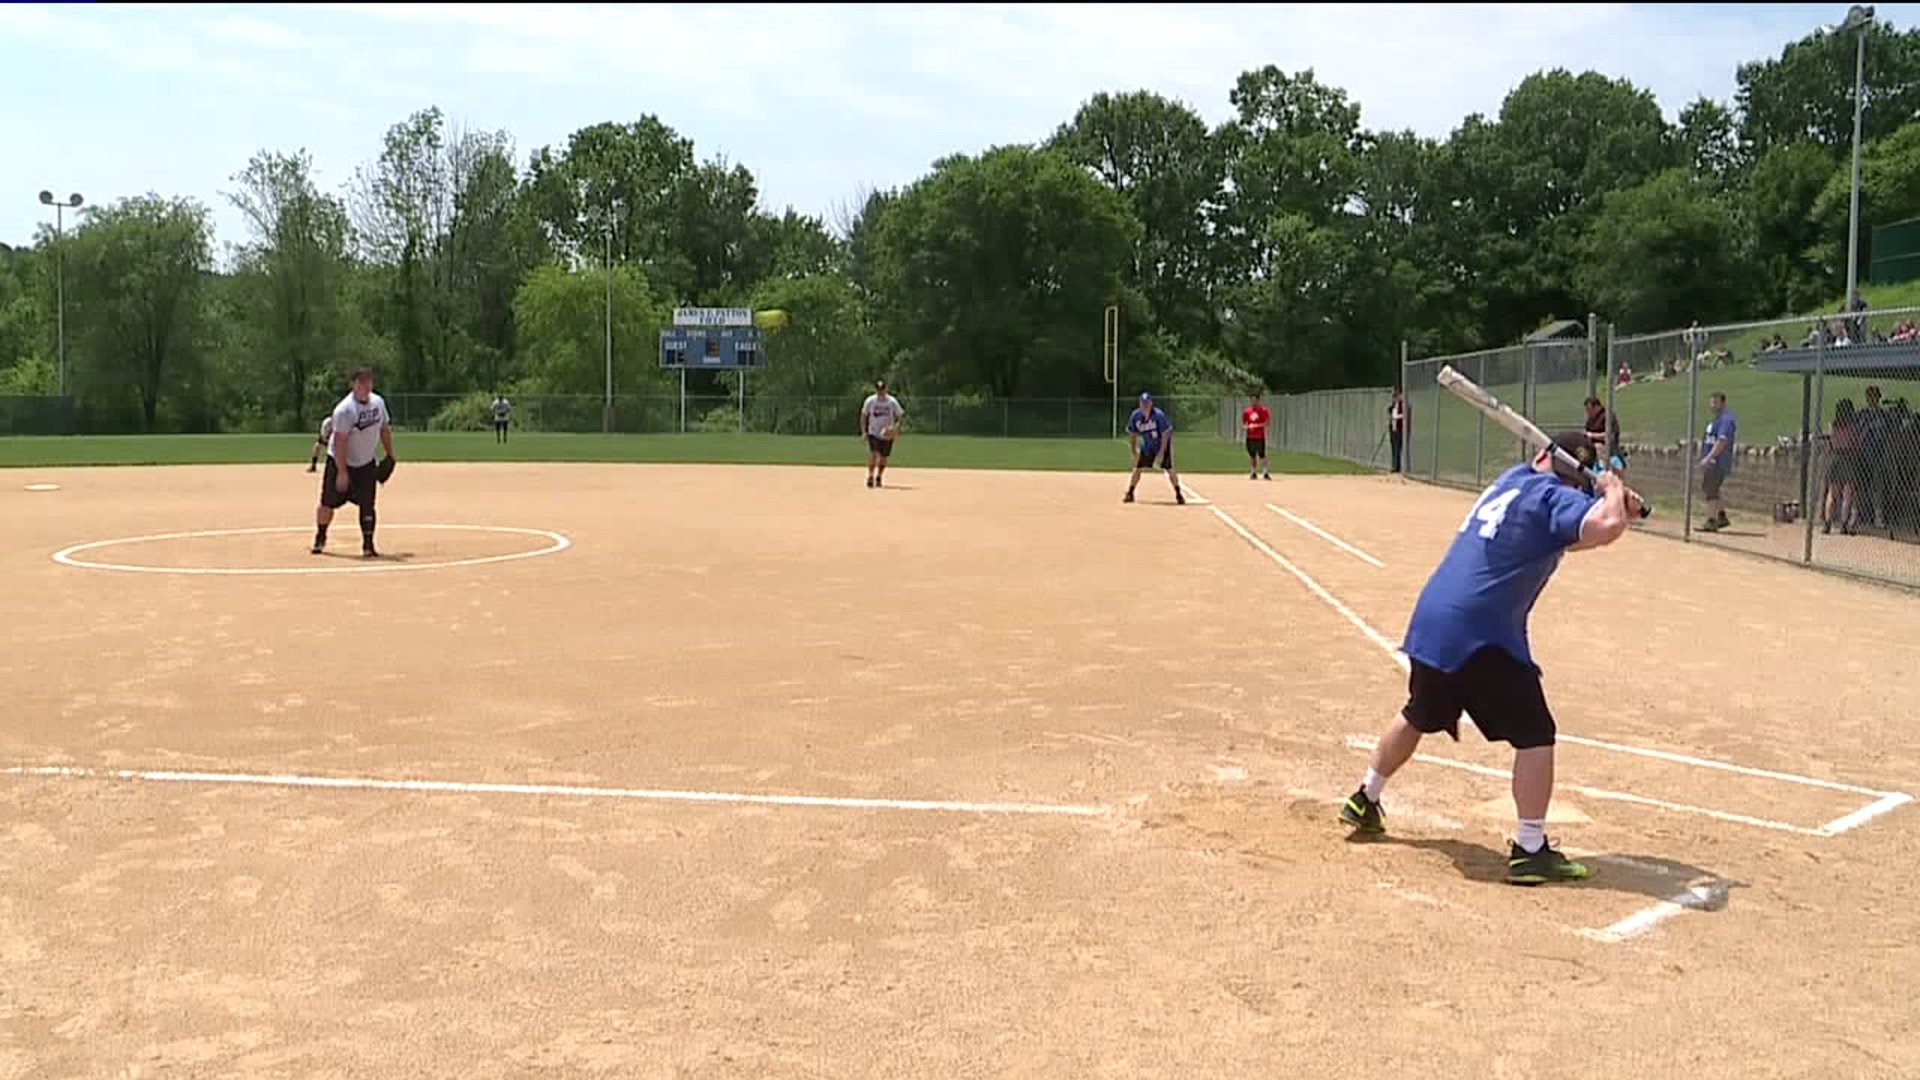 'We're No Different' - State Police Hit the Softball Diamond